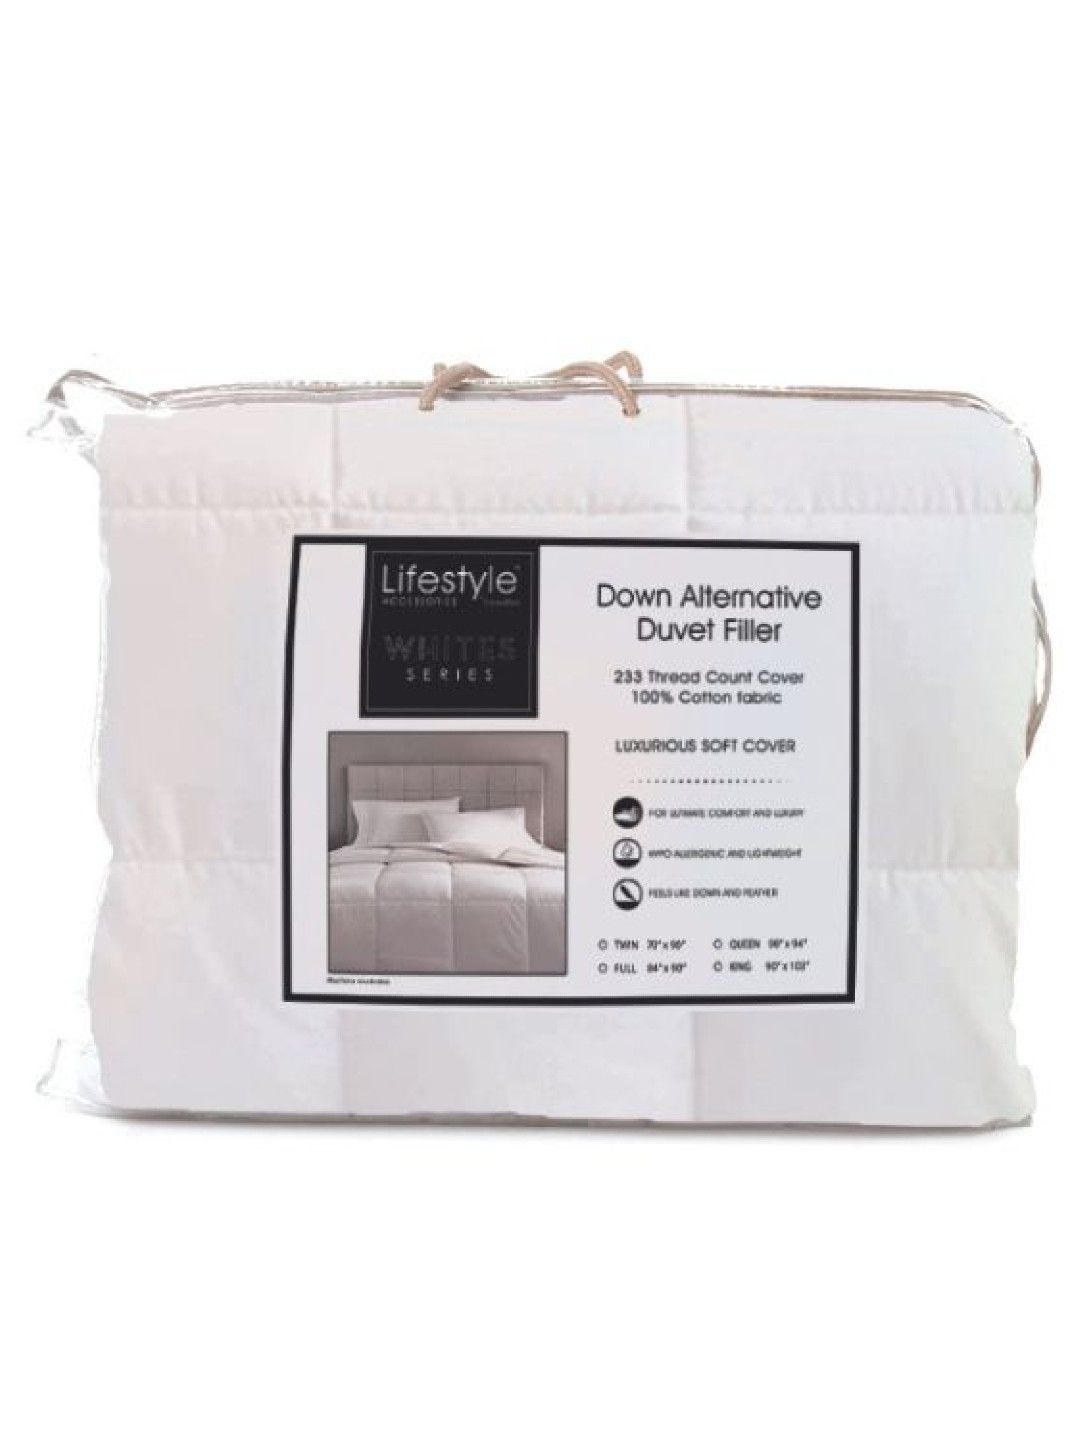 Lifestyle by Canadian Duvet Filler Lifestyle Microfiber